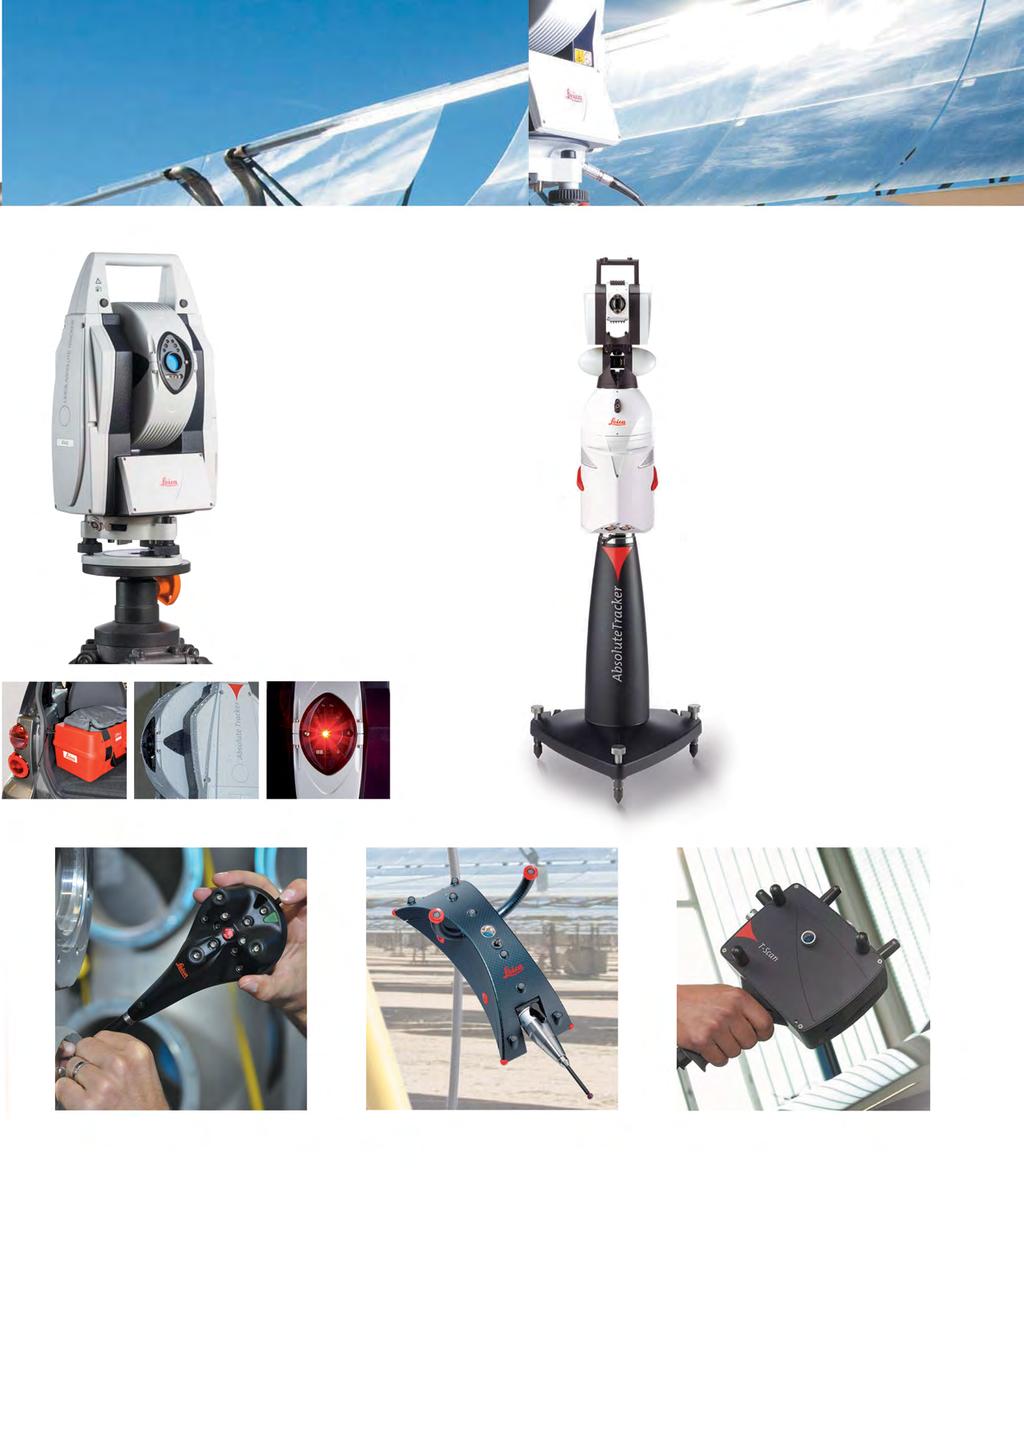 PORTABLE CMM The Leica Absolute Tracker AT402 a portable coordinate measuring machine (CMM) that allows extreme precision over ultra large distances.